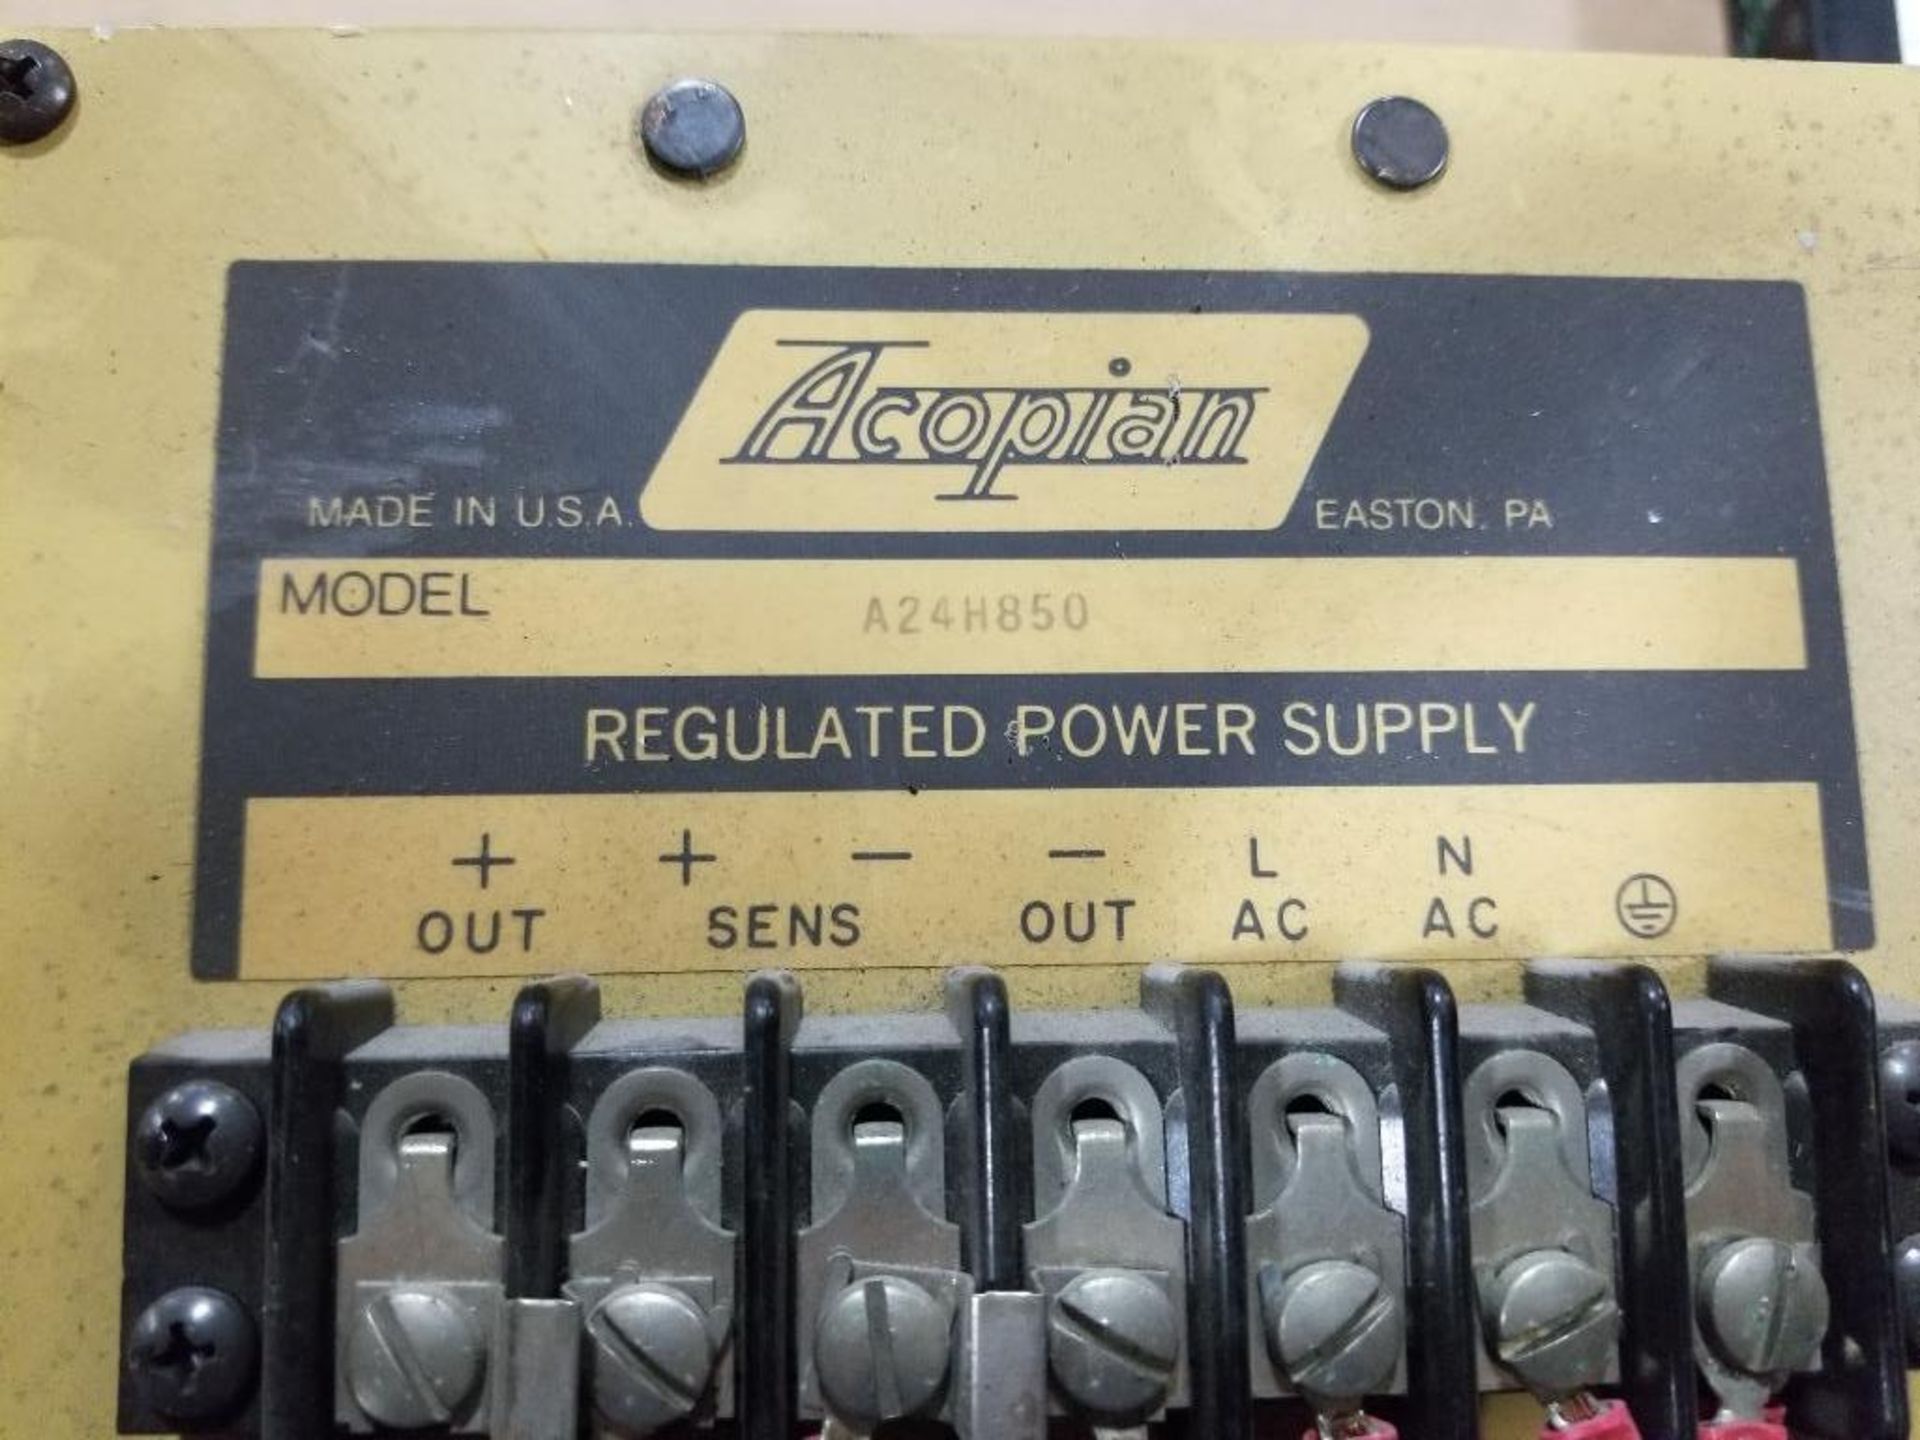 Acopian A24H850 regulated power supply. - Image 2 of 3